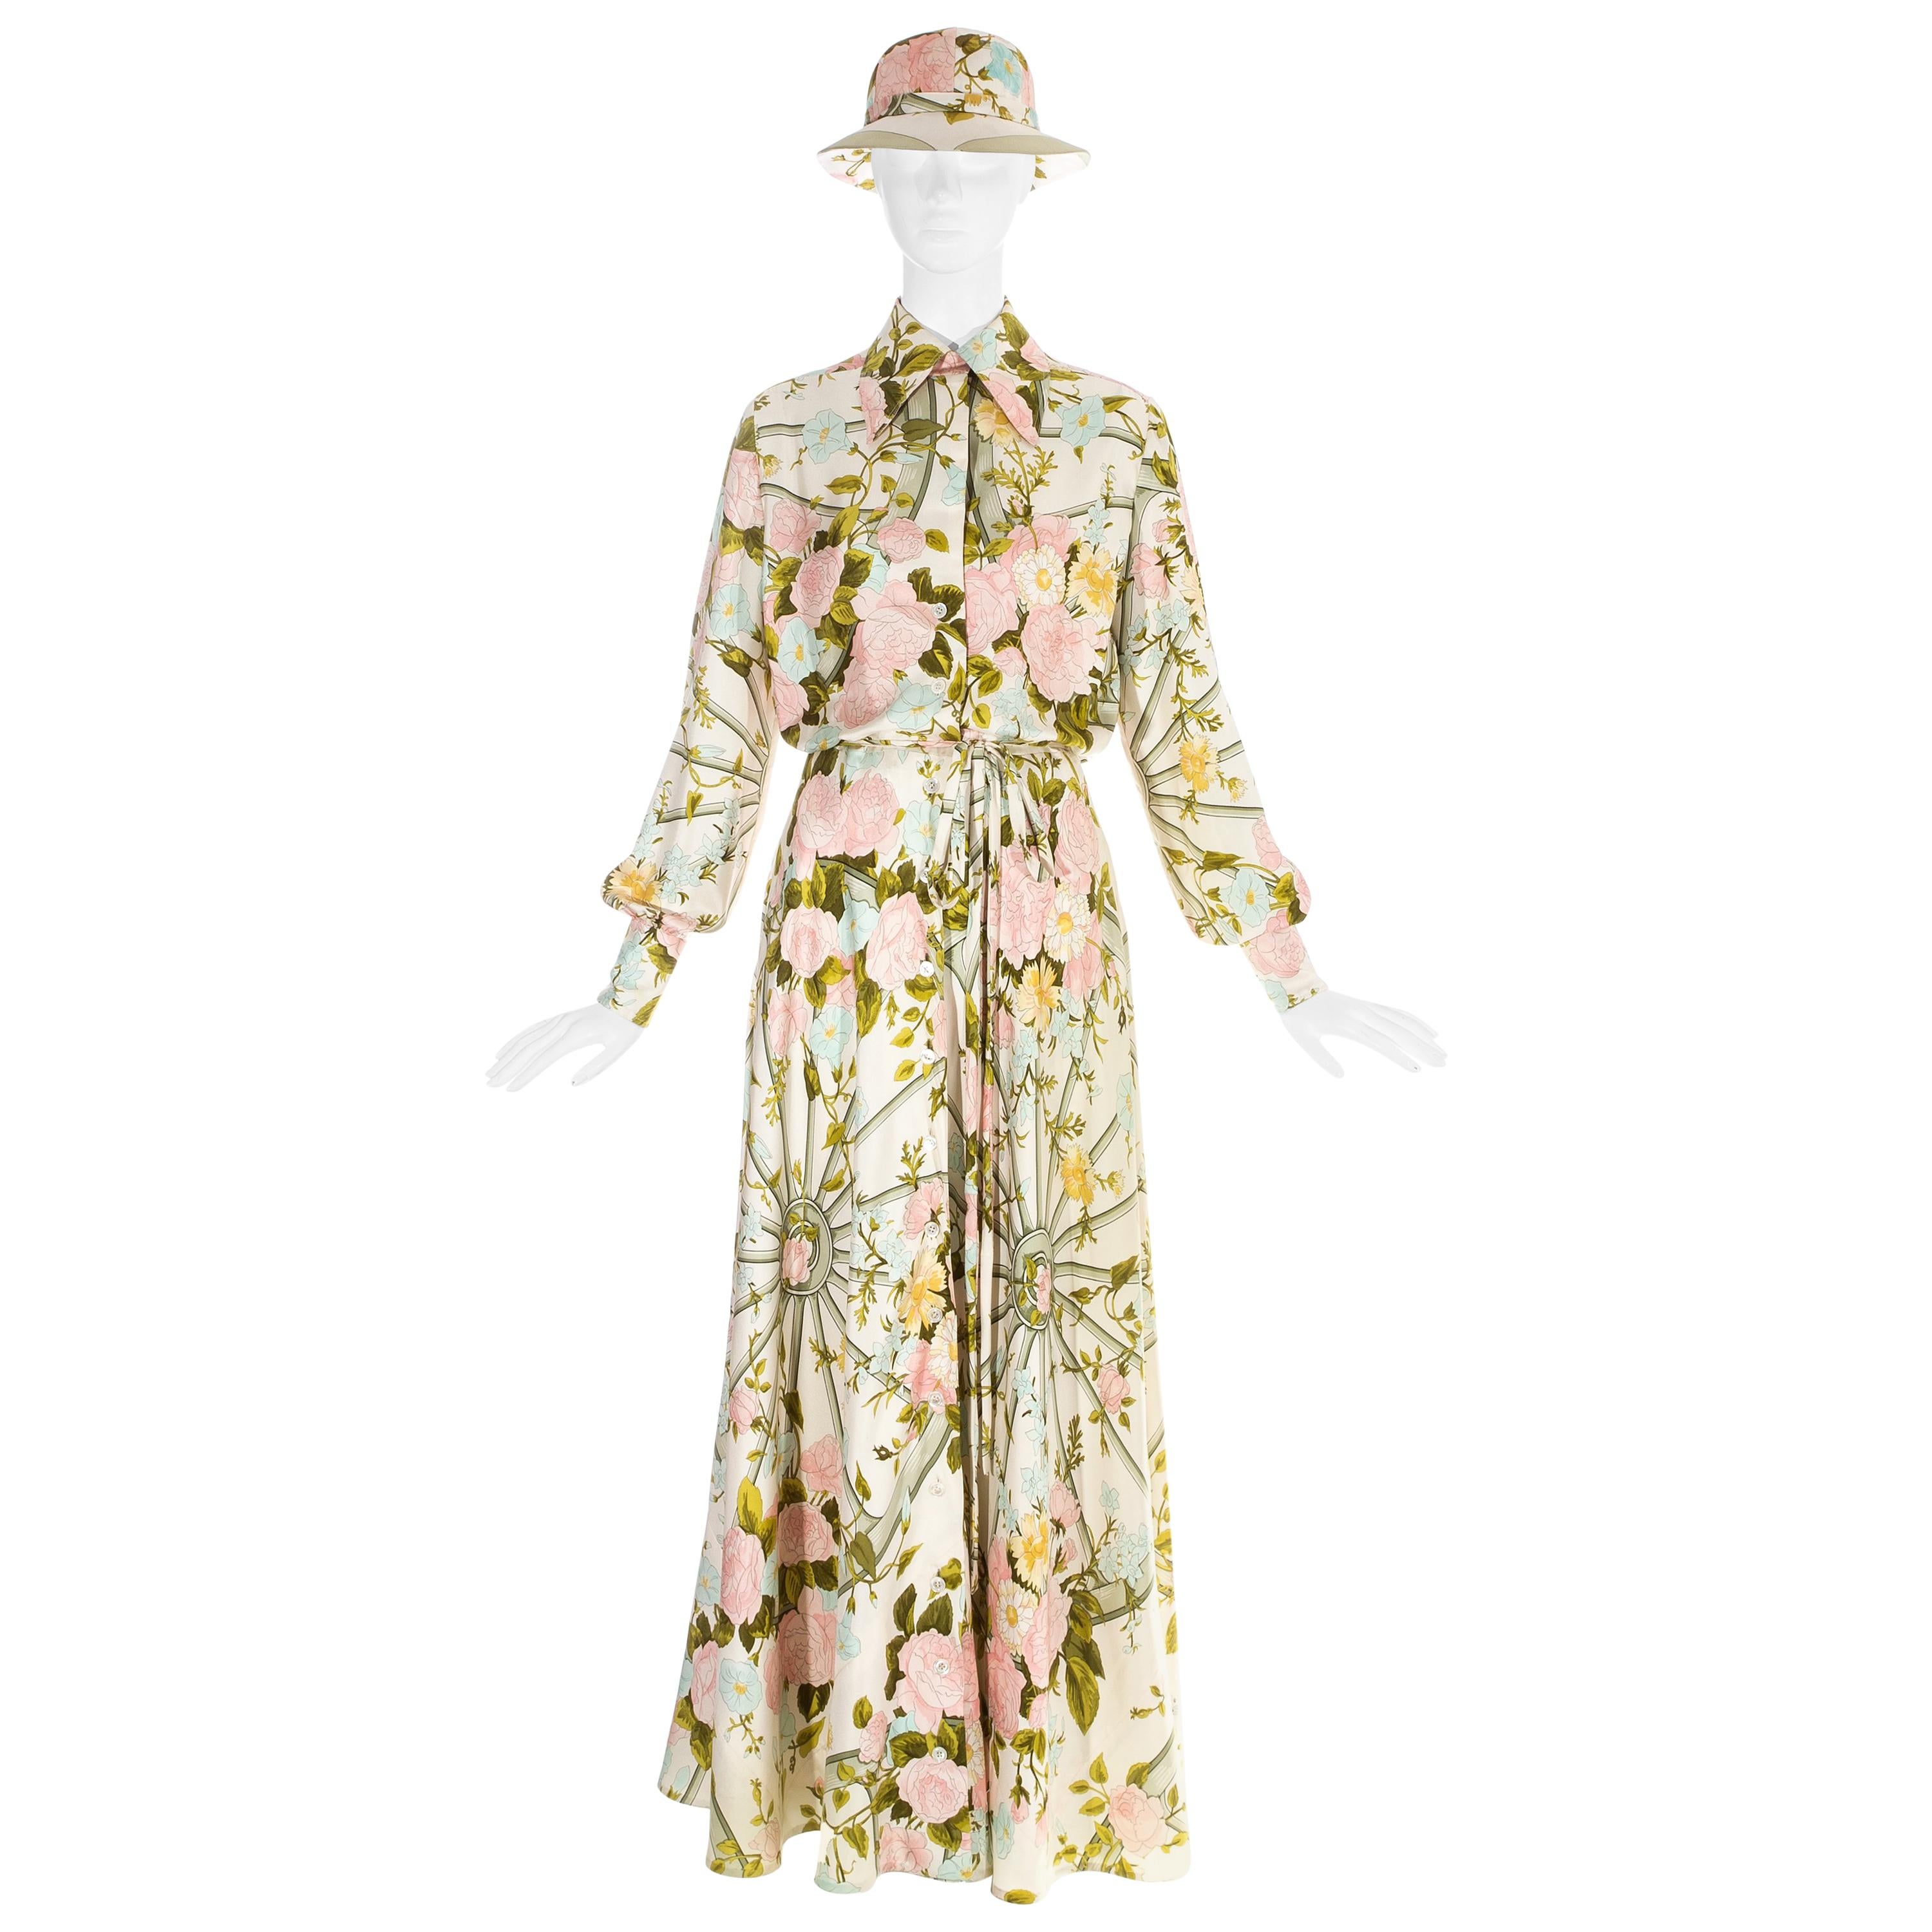 Hermes silk floral maxi shirt dress with matching sunhat, c. 1970s For Sale